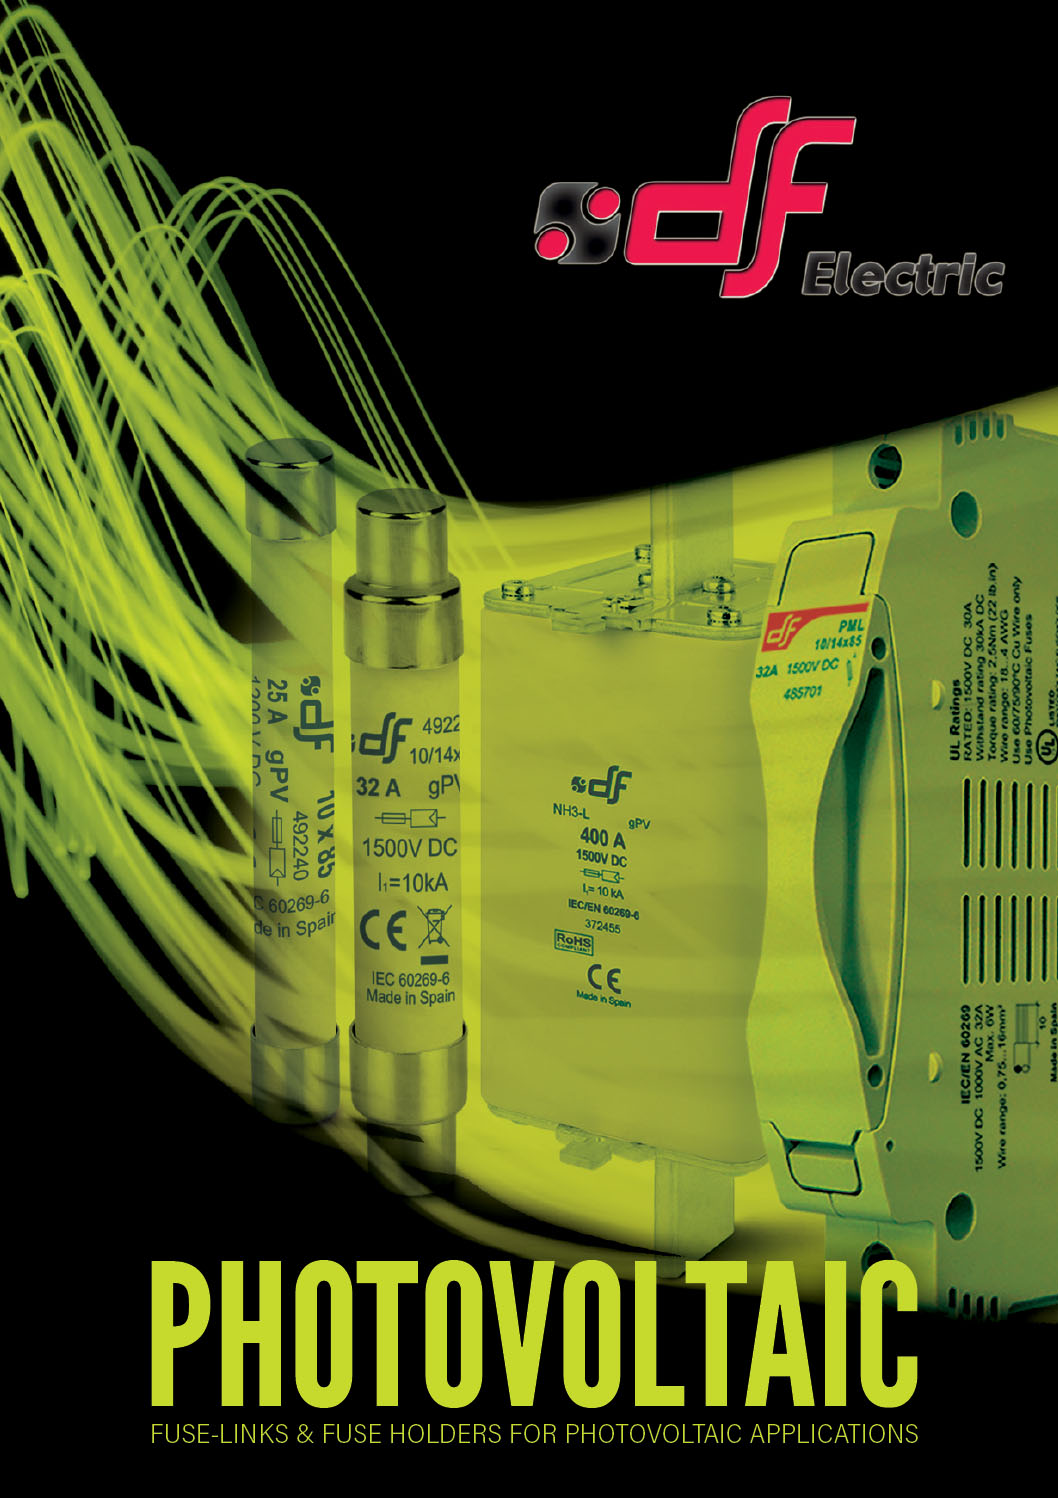 DF photovoltaic-fuses-and-bases supplied by ElectroMechanica